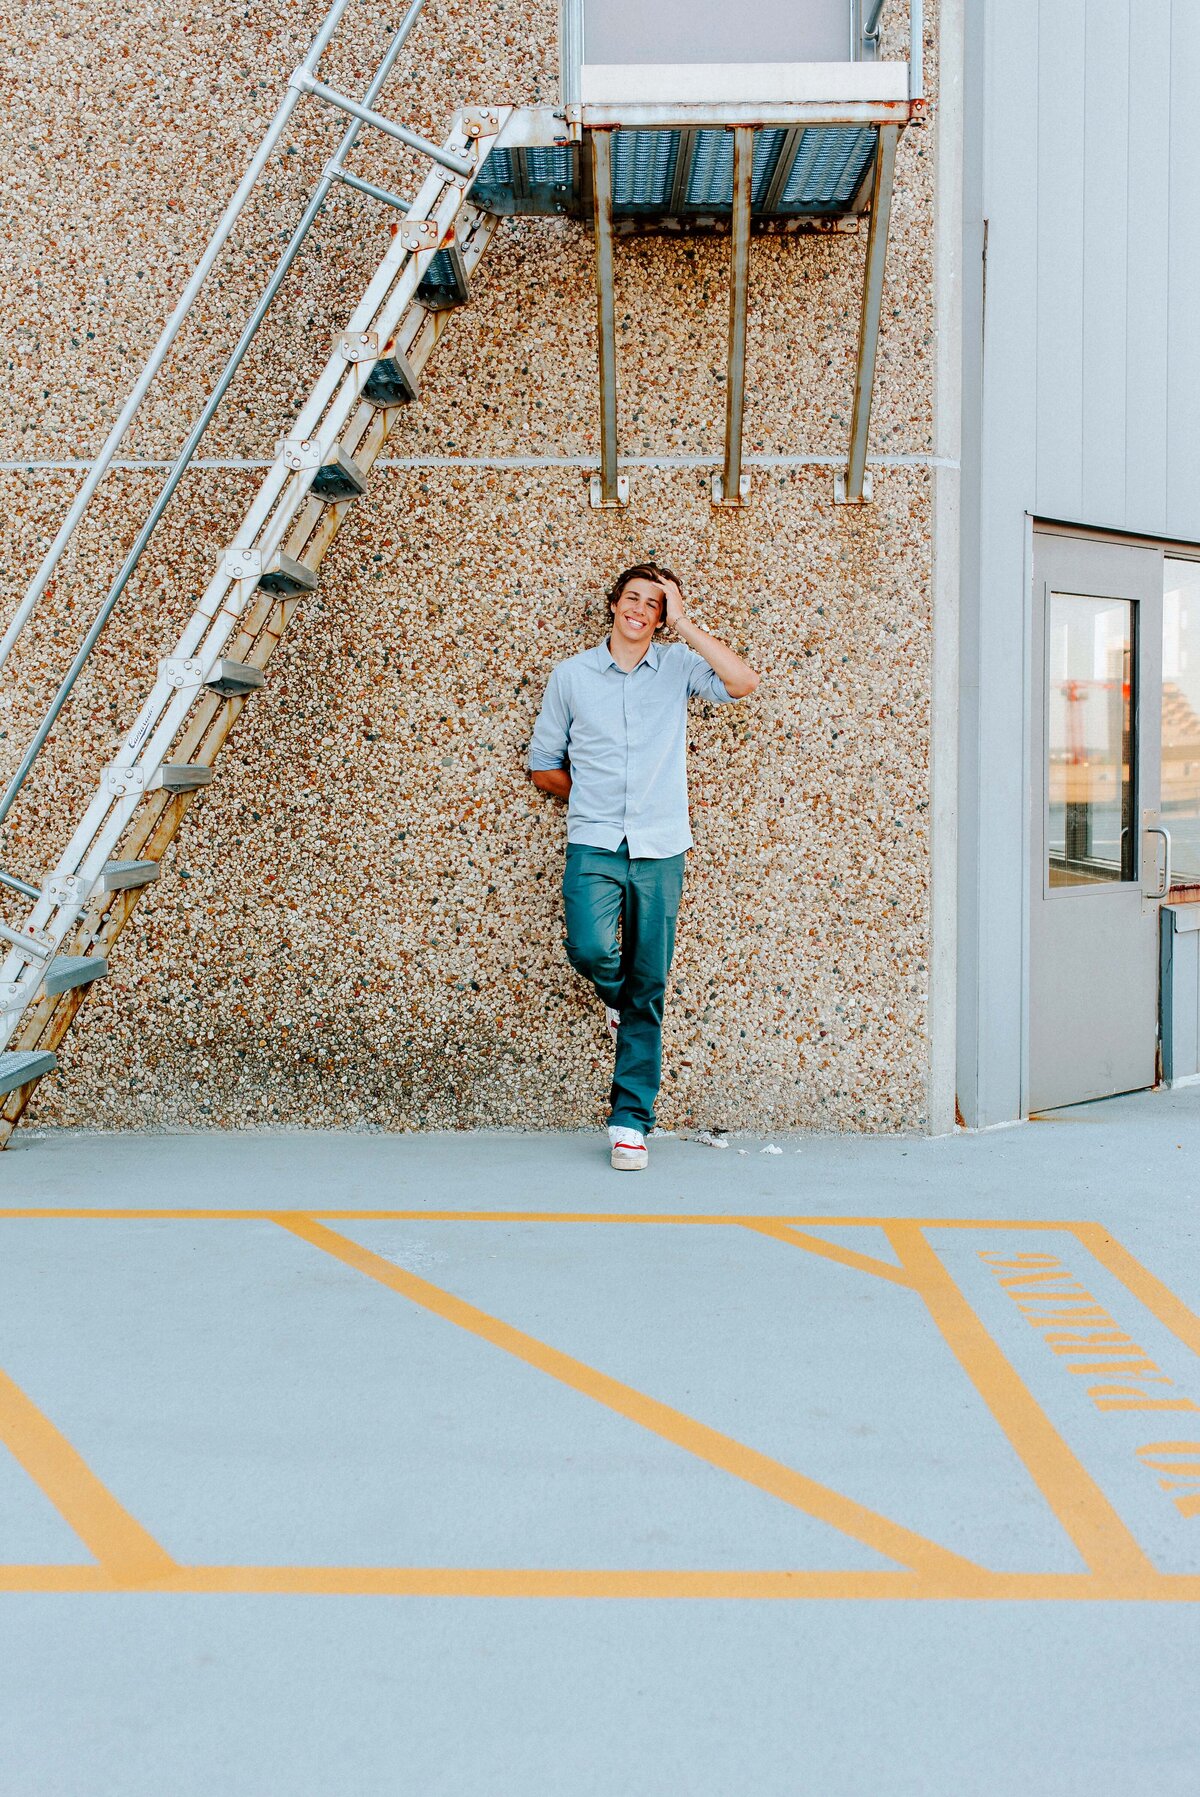 An Edina High School senior graduate stands confidently on the rooftop of a downtown Minneapolis parking garage, leaning against a wall near a flight of stairs. This dynamic senior portrait captures the spirit of achievement and adventure as he takes his place on the city skyline, marking the culmination of his high school journey.